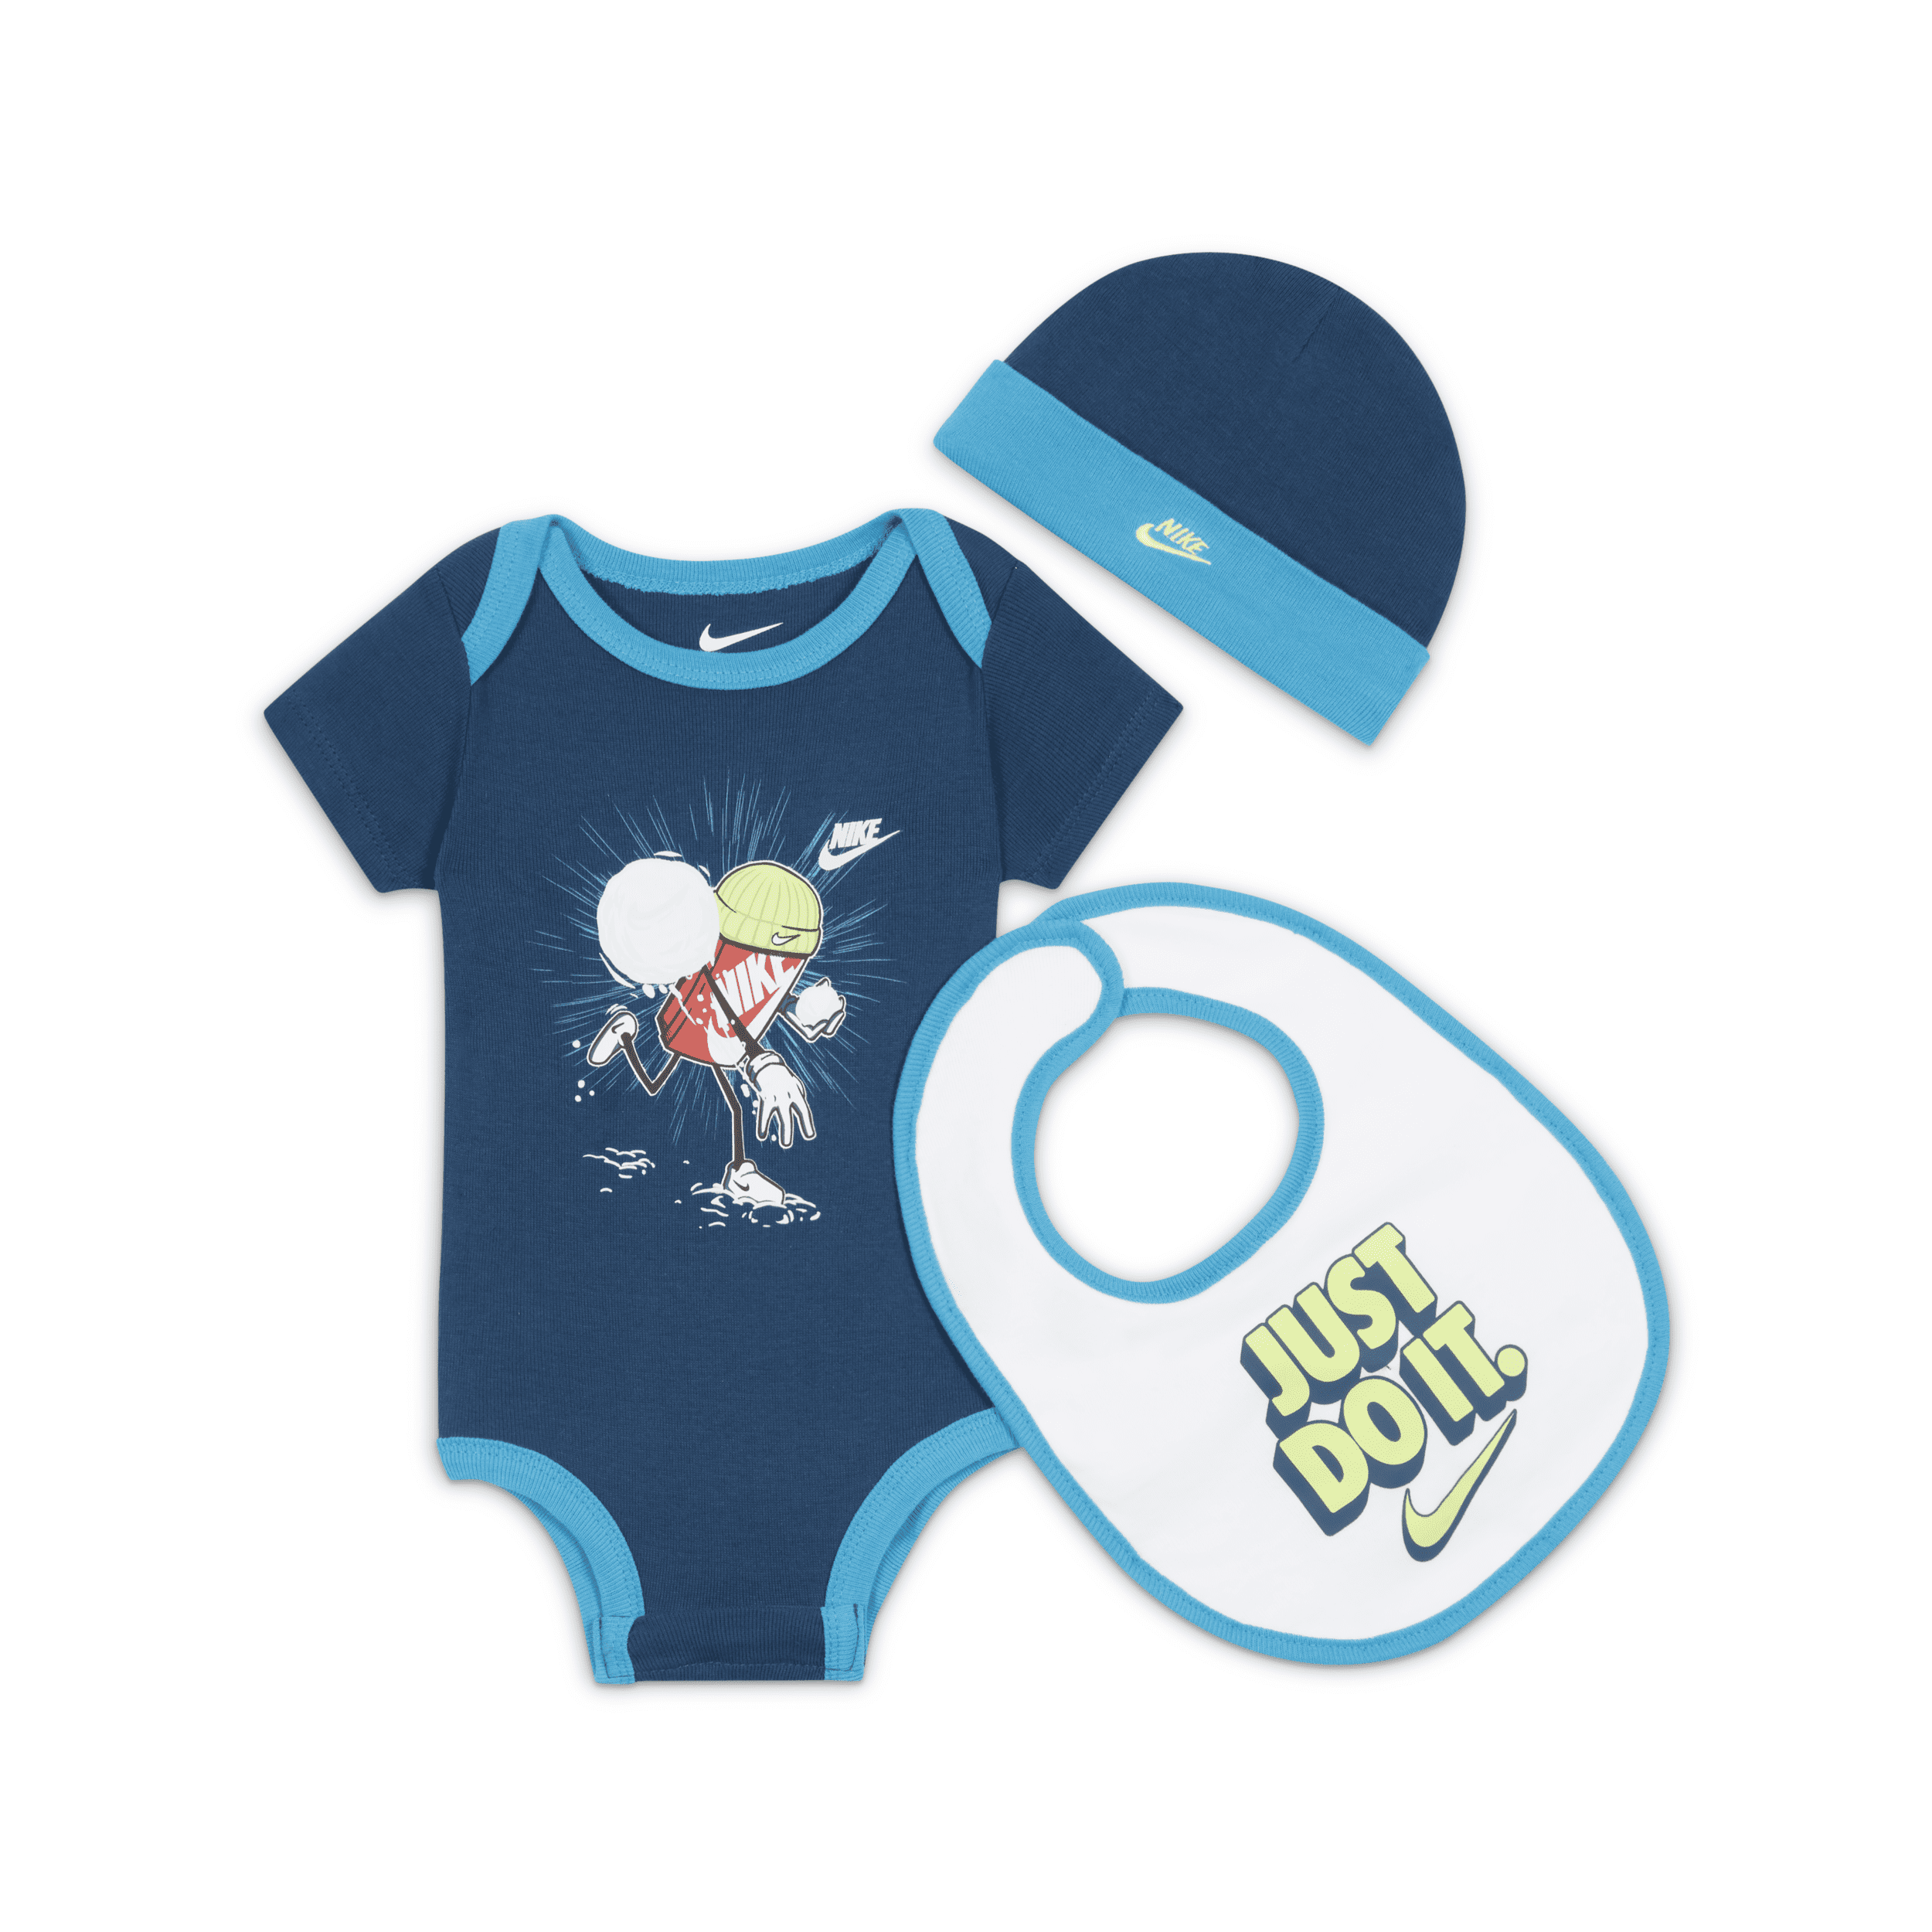 Nike Cool After School 3-piece Box Set Baby Set In Blue